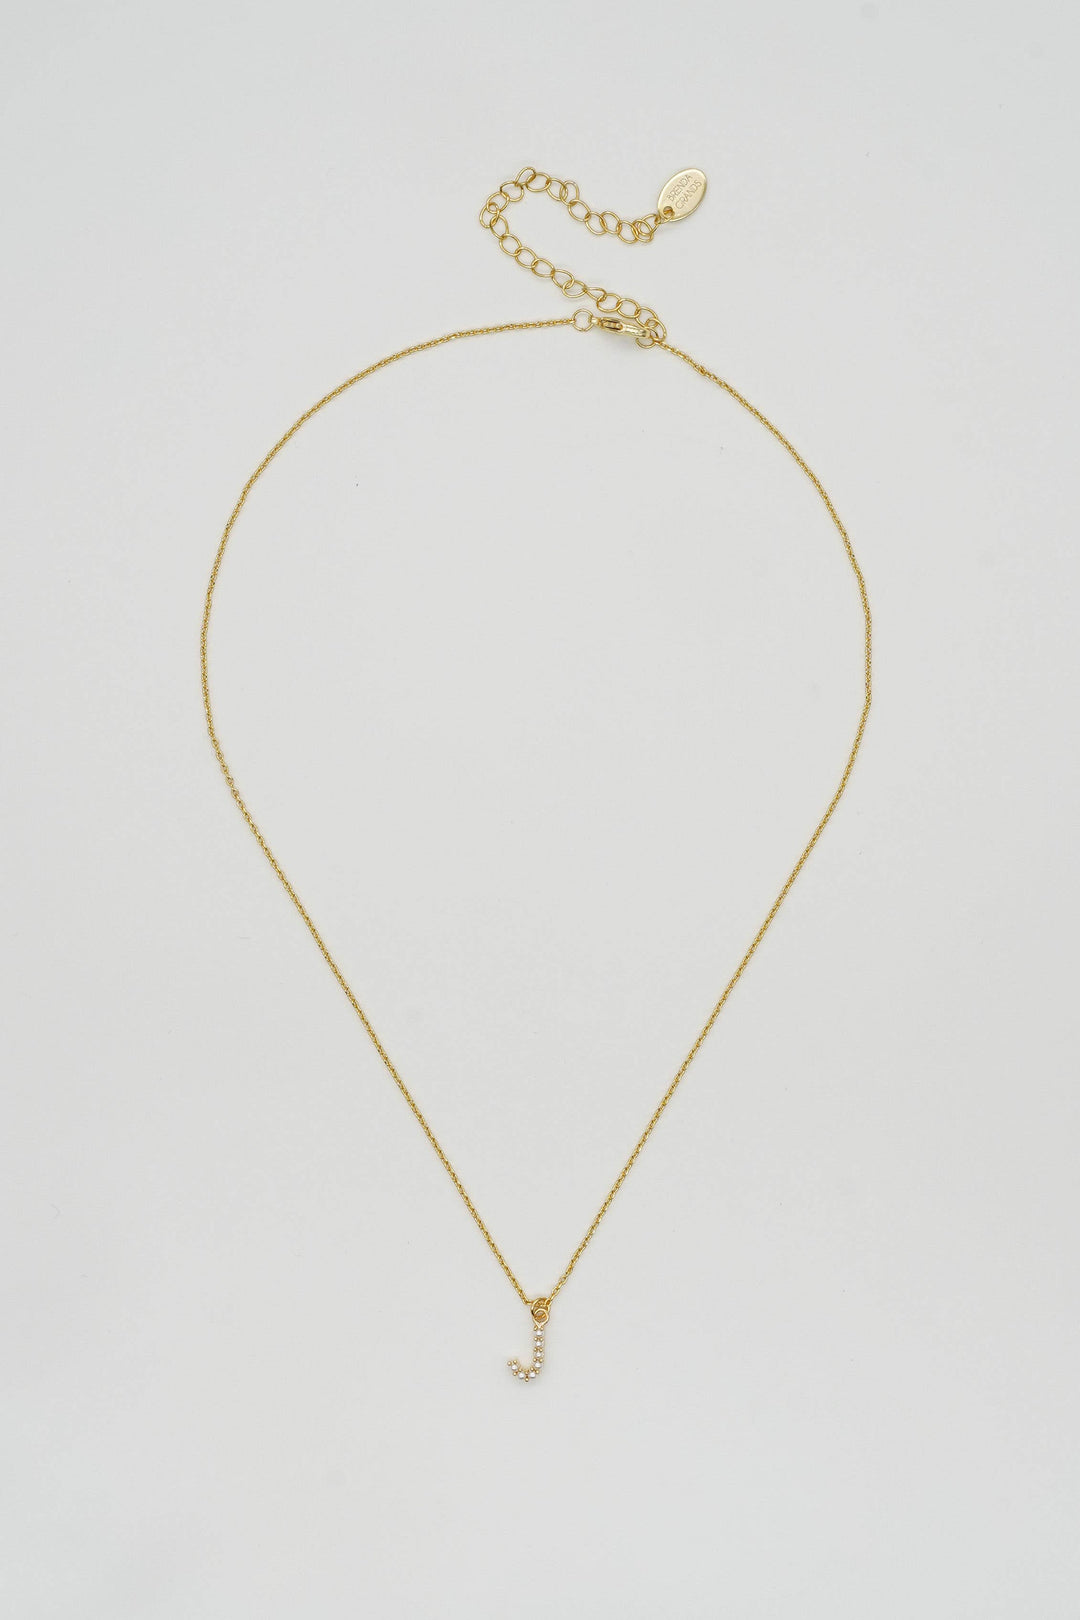 Dainty Love Pearl Initial Necklace: Holiday Favorite: J/ 15"+3"